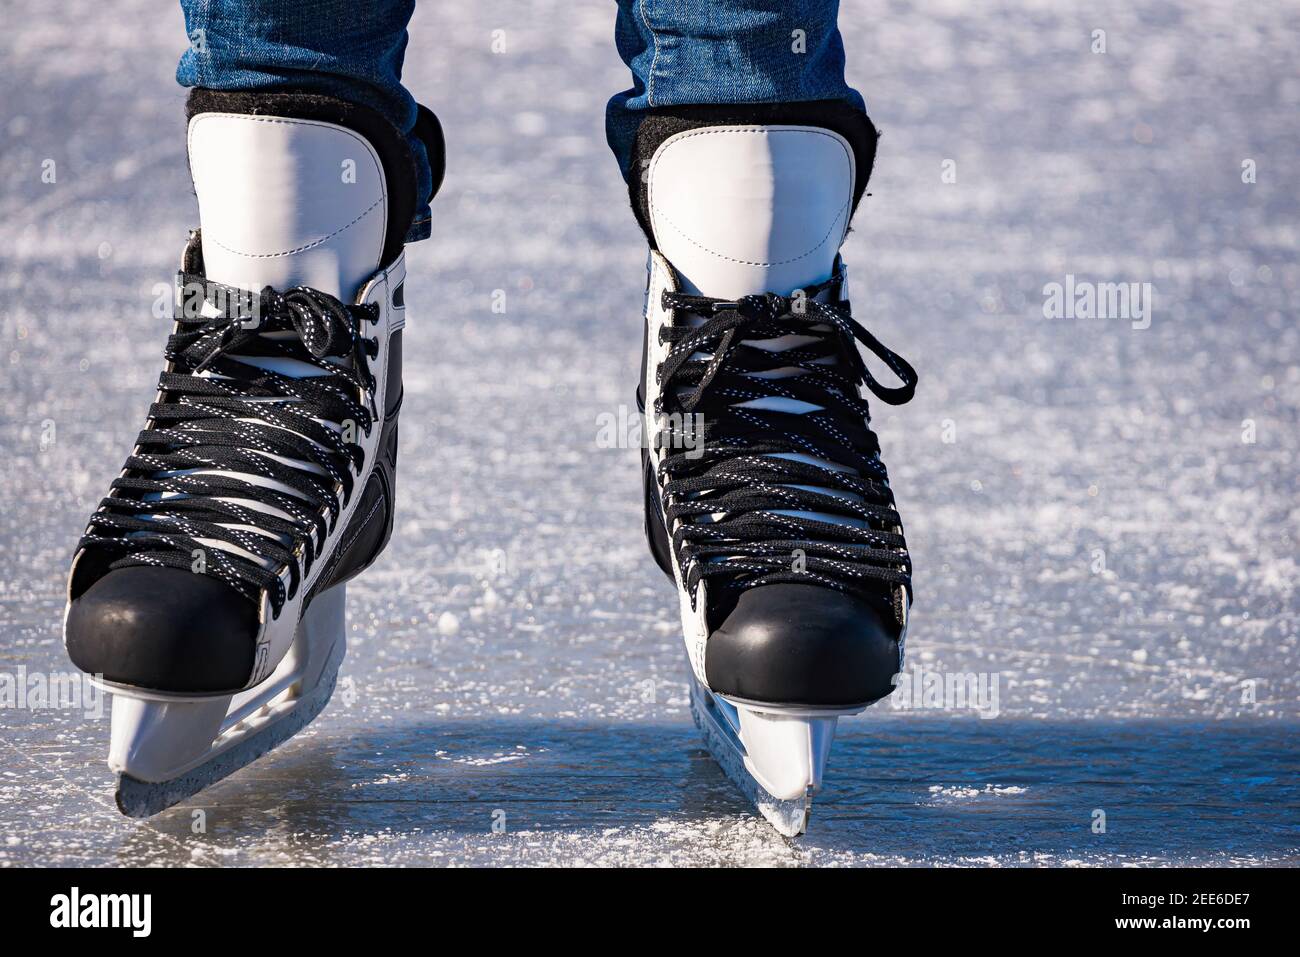 https://c8.alamy.com/comp/2EE6DE7/detail-of-the-black-and-white-mens-ice-skates-in-action-on-ice-2EE6DE7.jpg